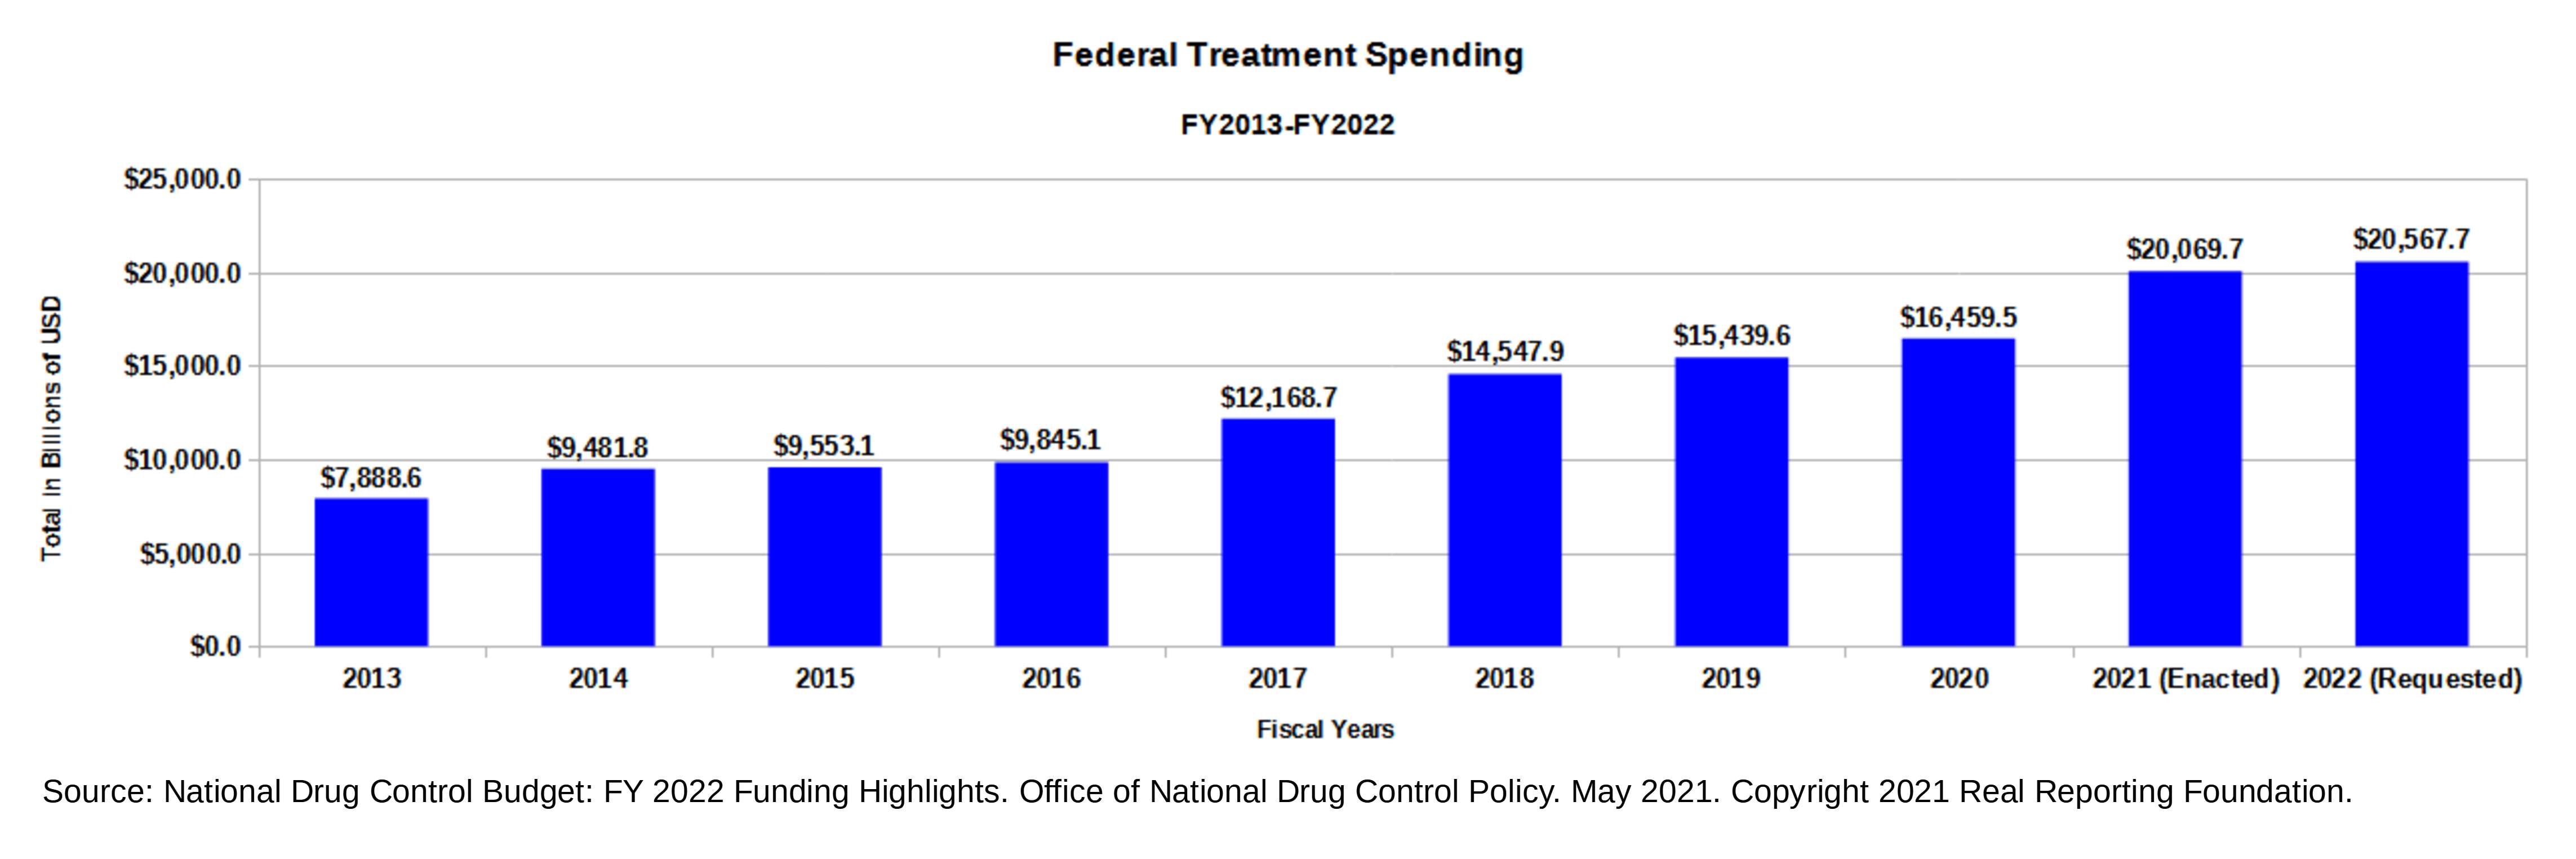 bar graph showing federal drug control spending on substance use disorder treatment from FY2013 through FY2022